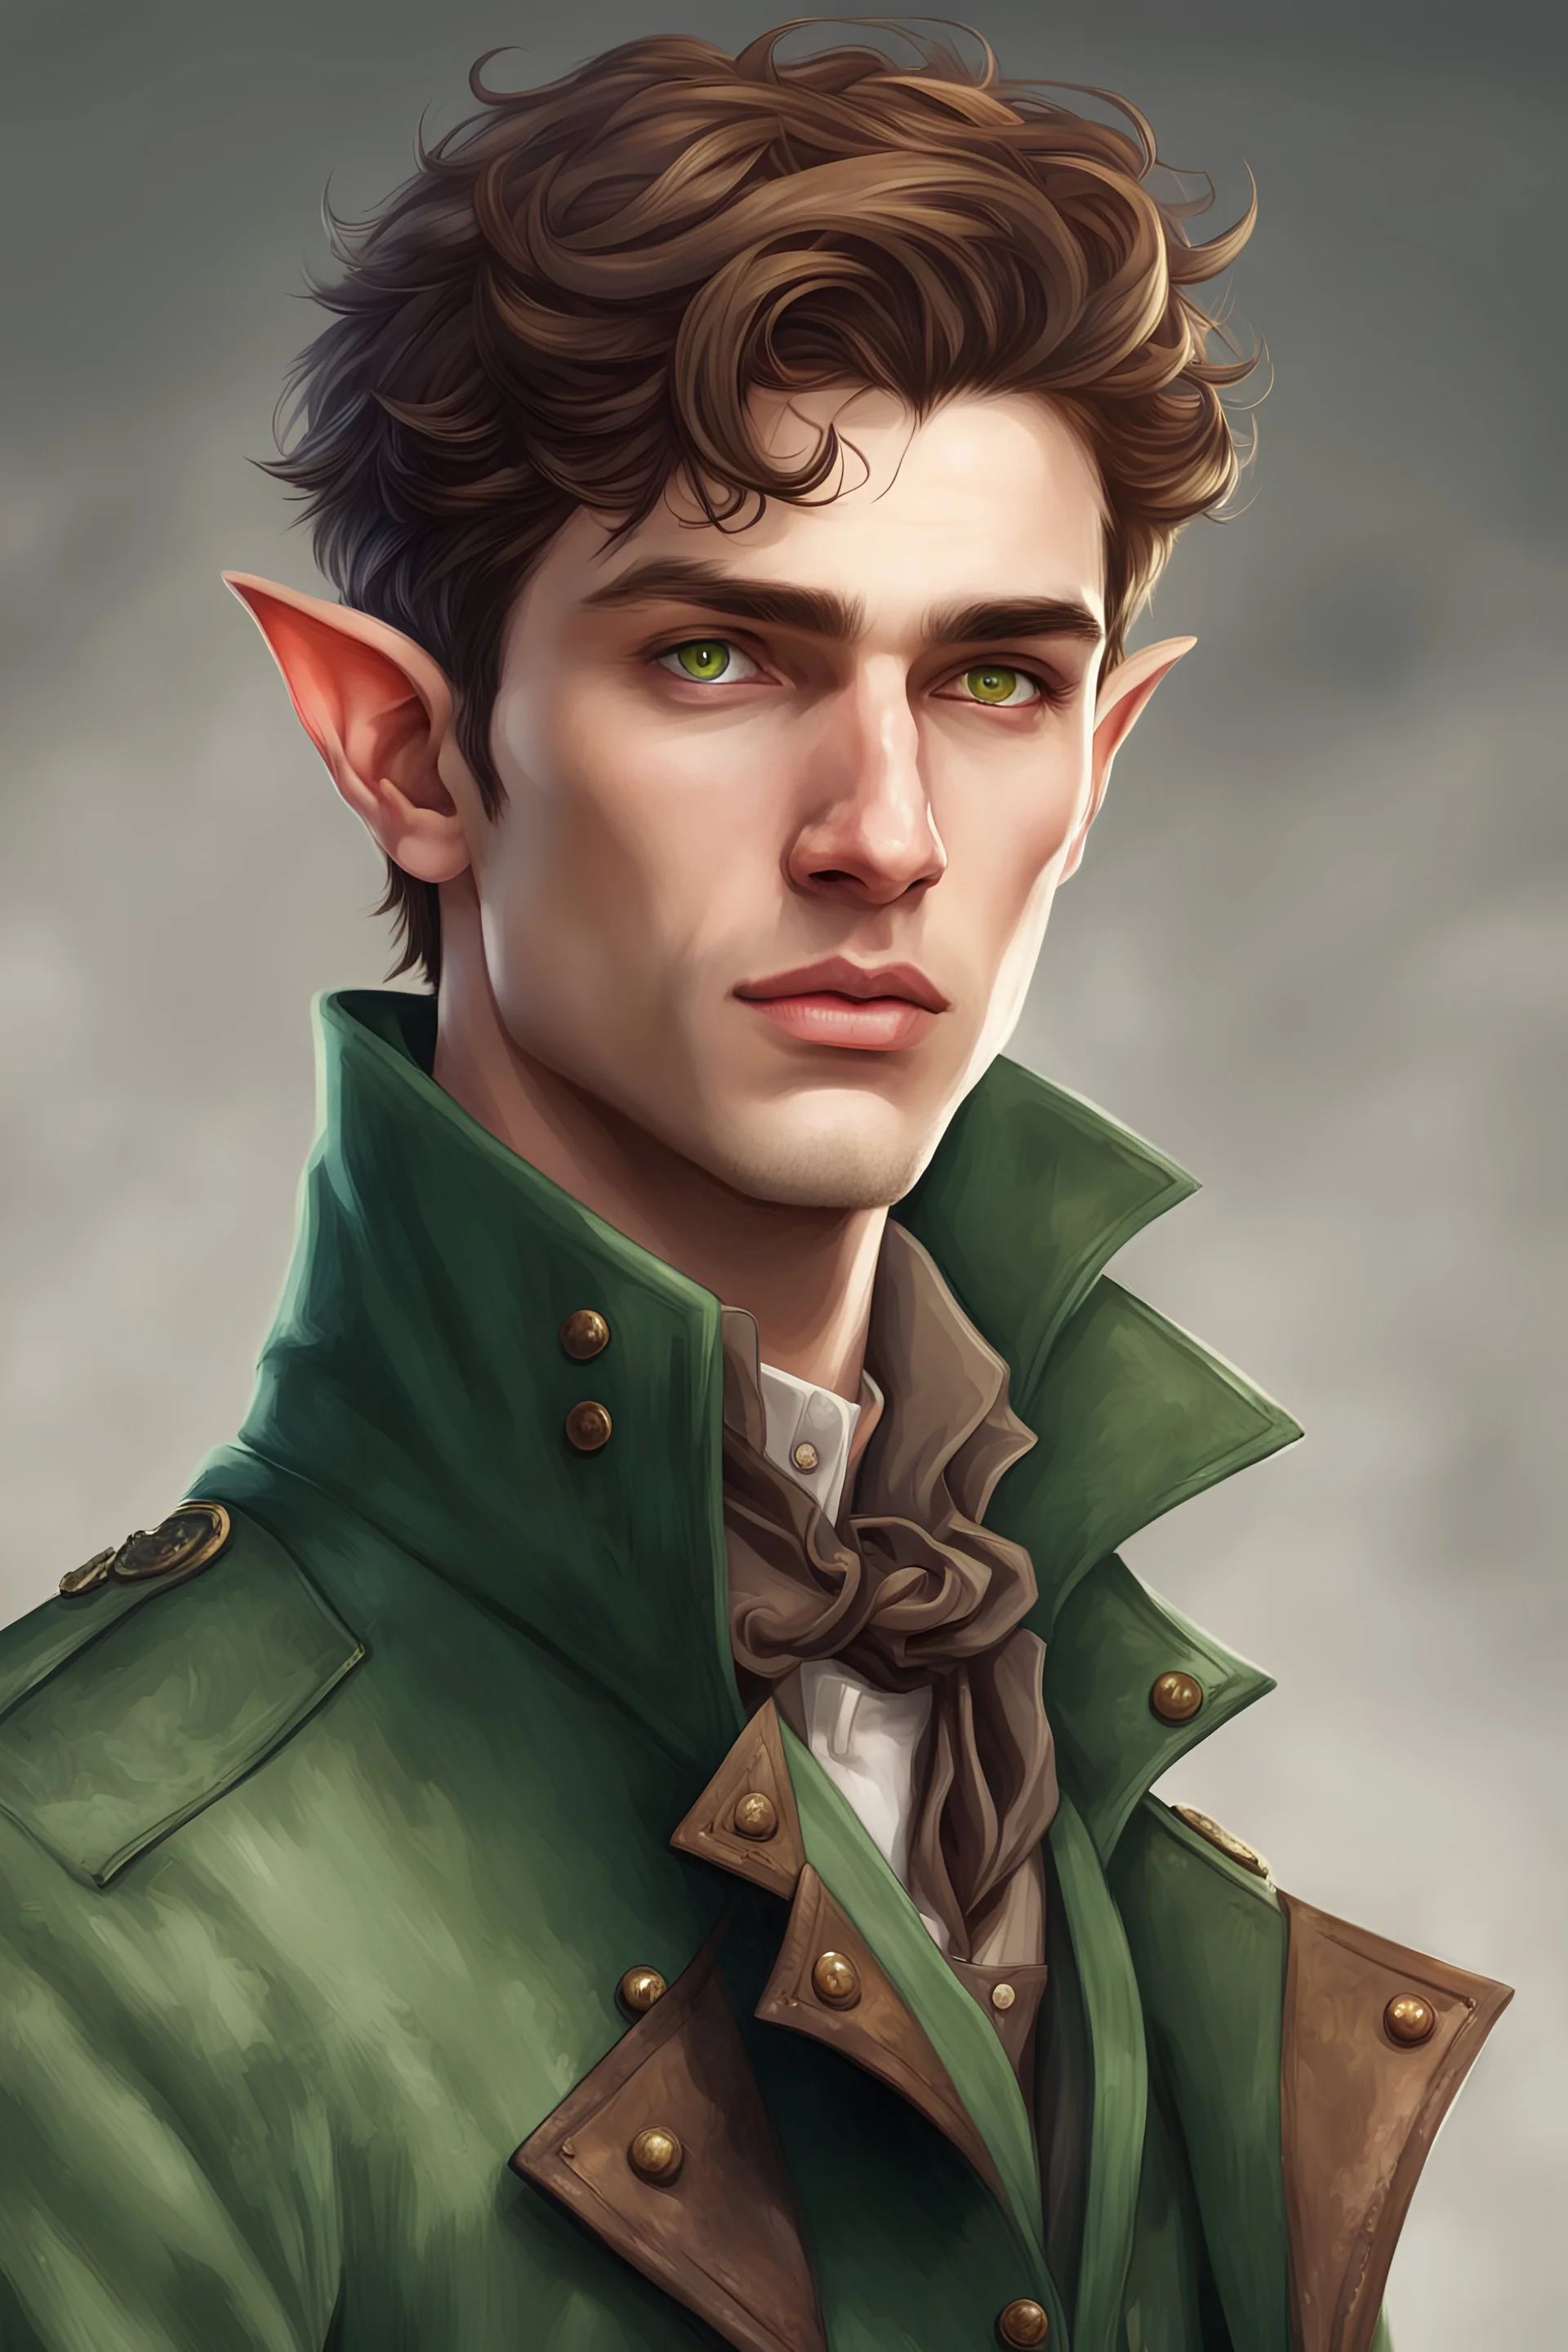 handsome elf man of twenty years old, with brown eyes, short brown hair, pointed ears, dressed in a steampunk style green trench coat.